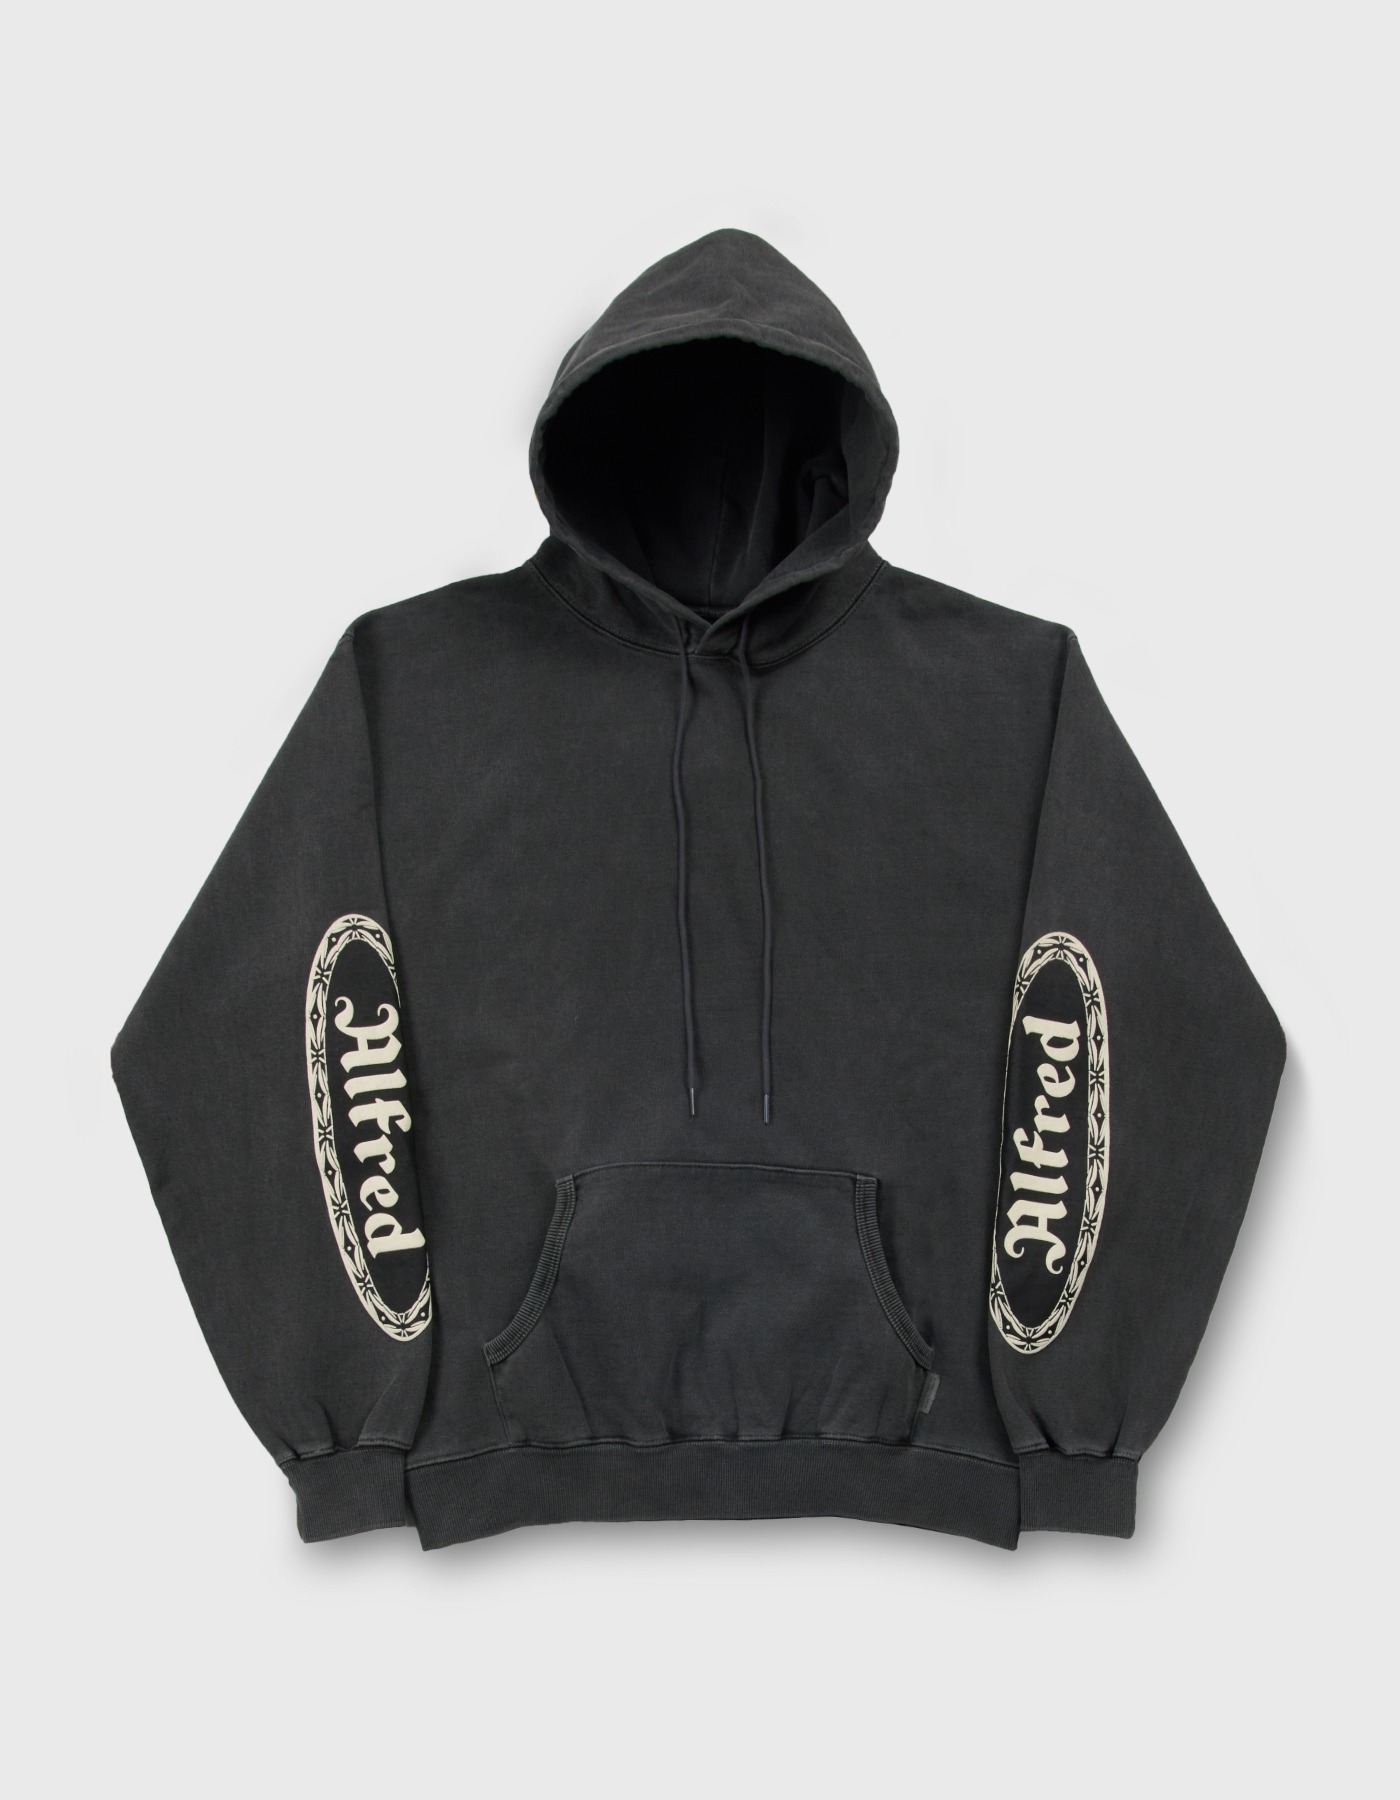 FRED PIGMENT HOODIE / Charcoal